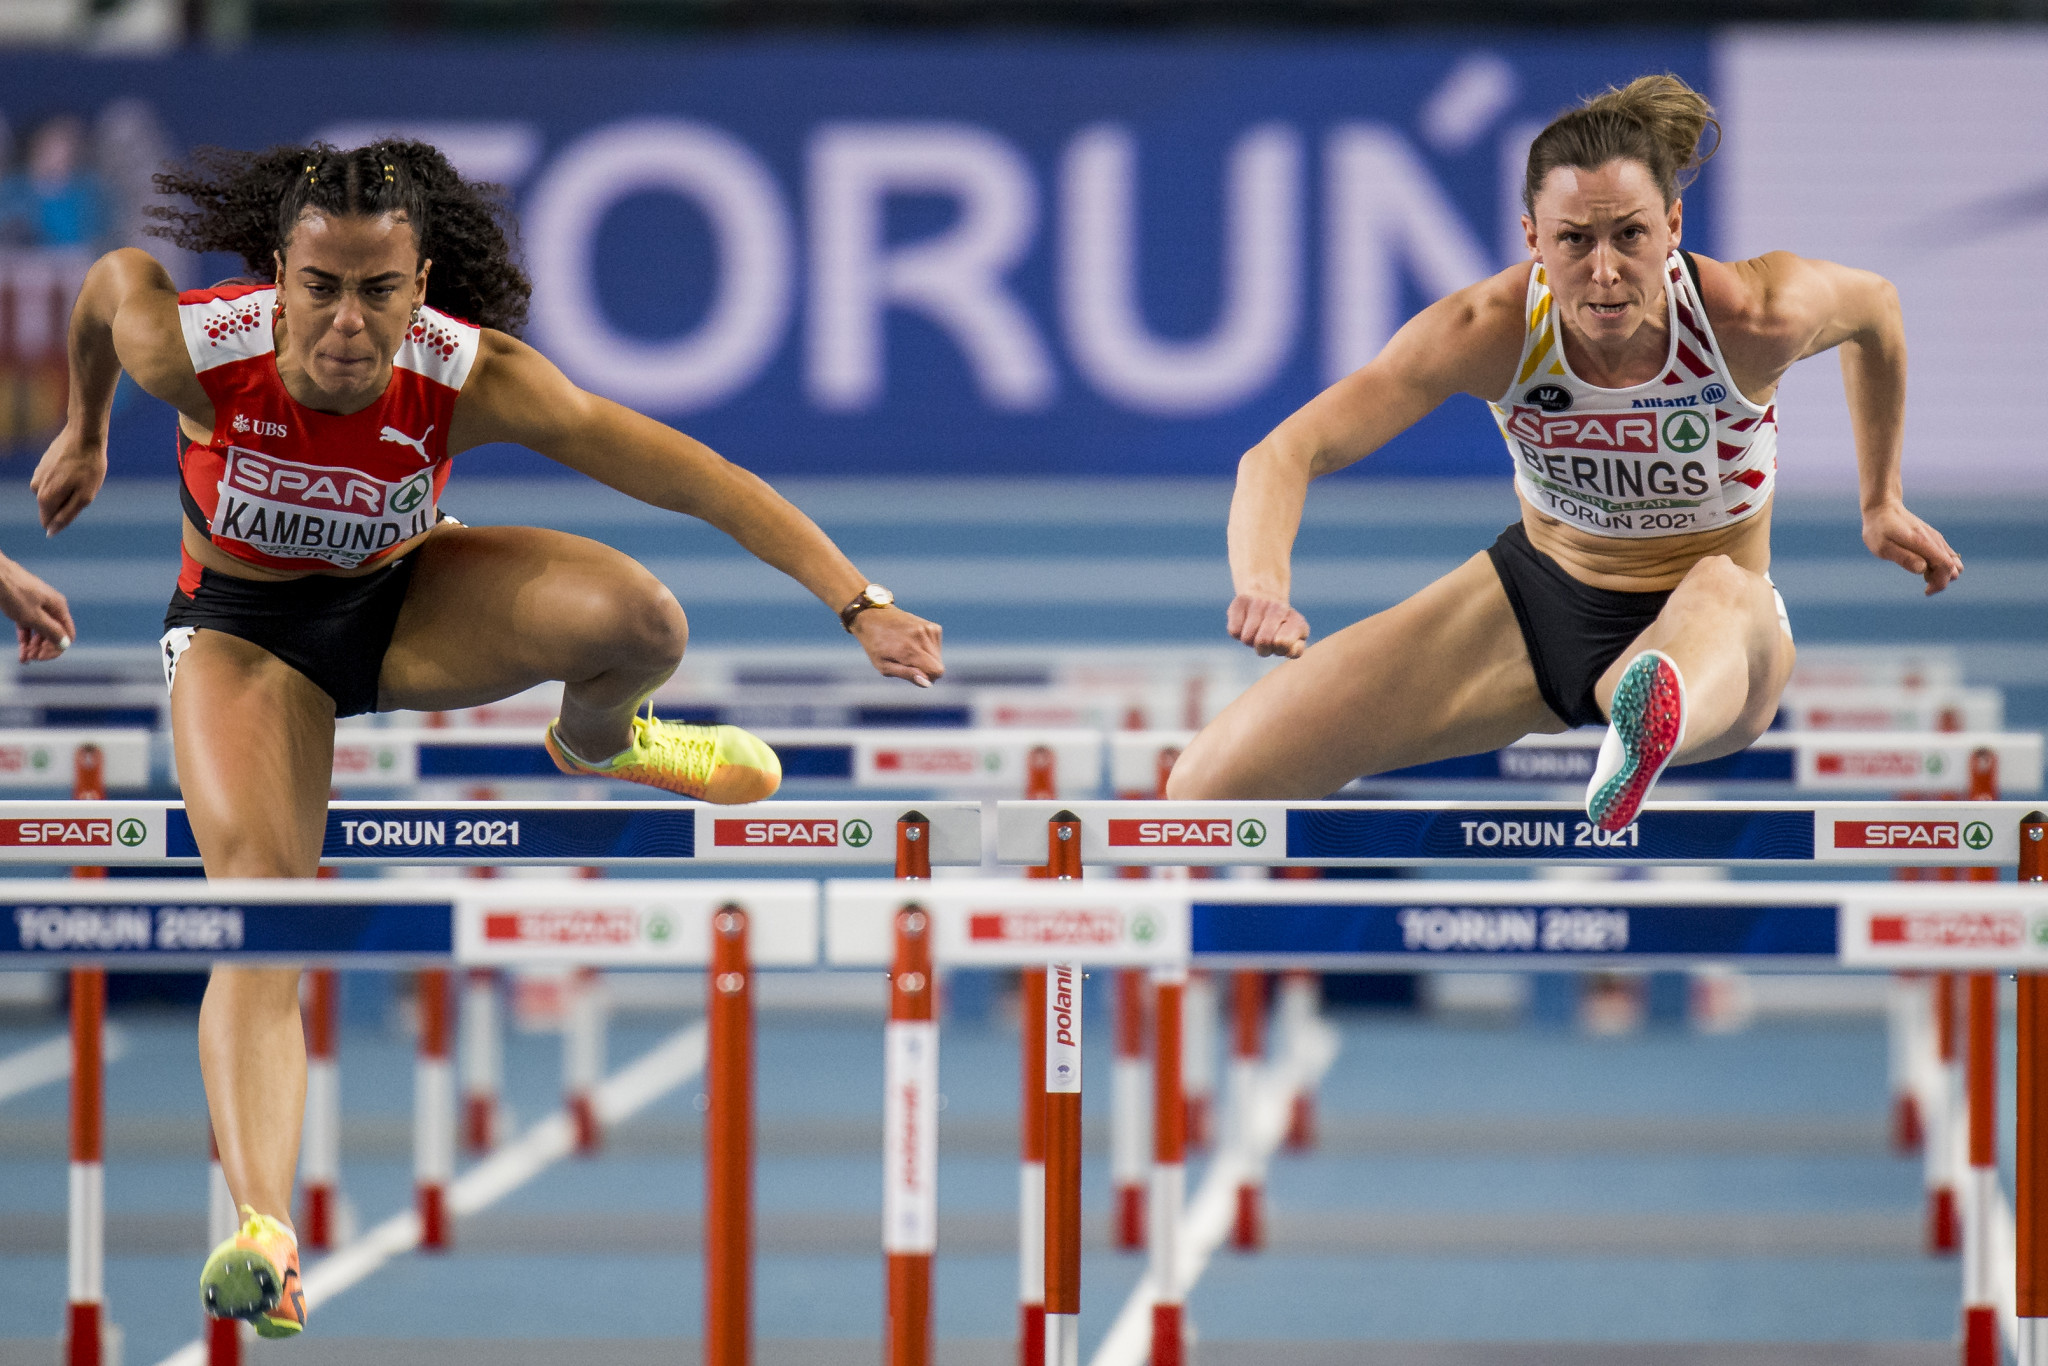 Berings questions COVID19 testing system at European Indoor Championships